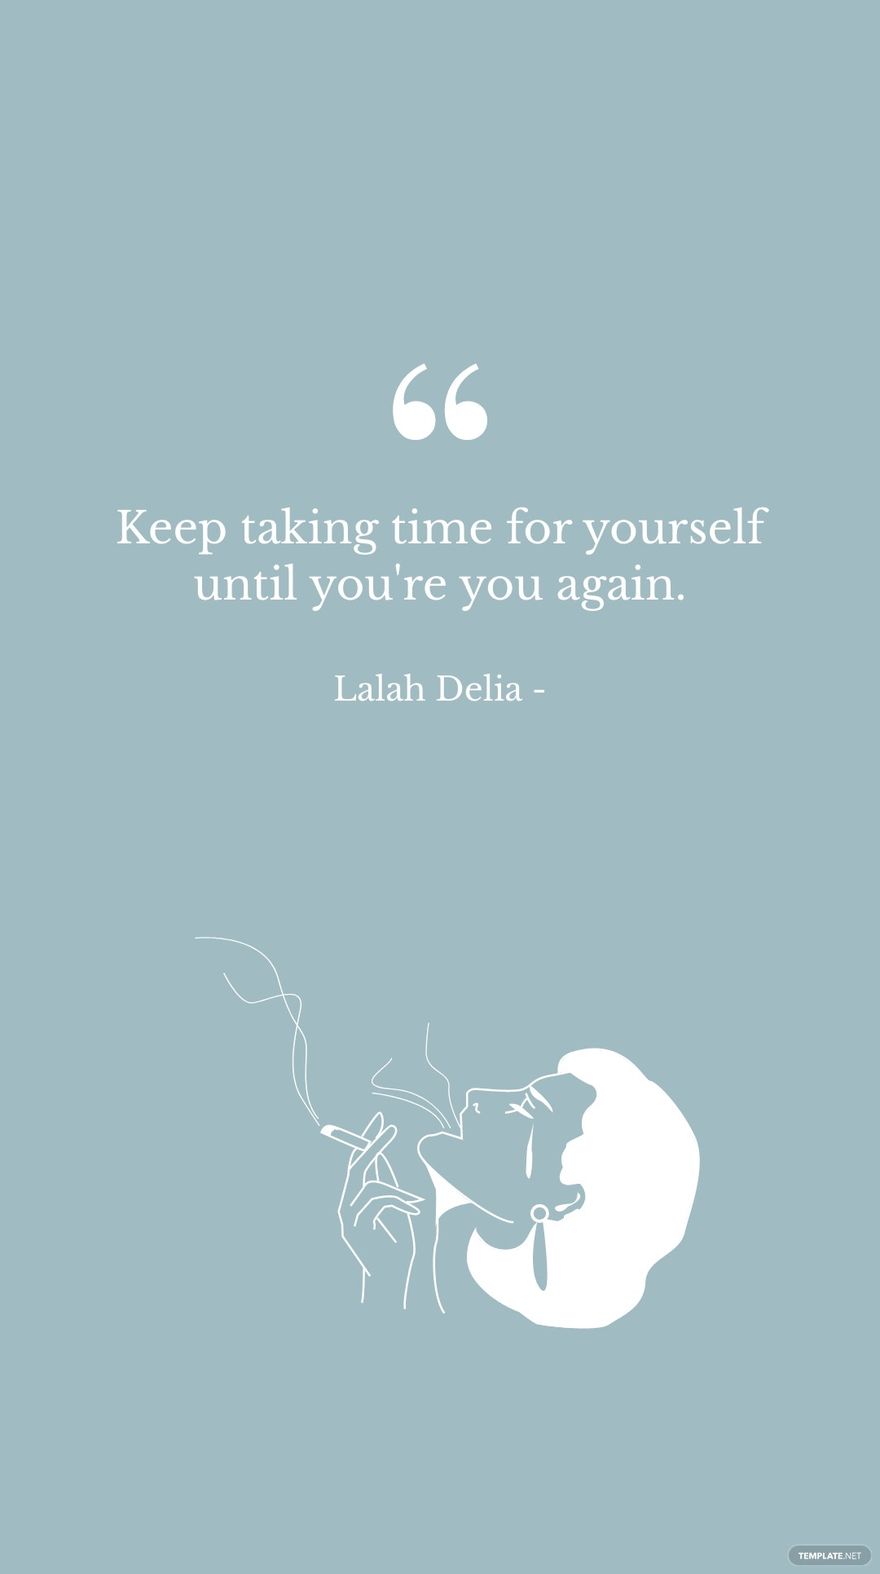 Lalah Delia - Keep taking time for yourself until you're you again.